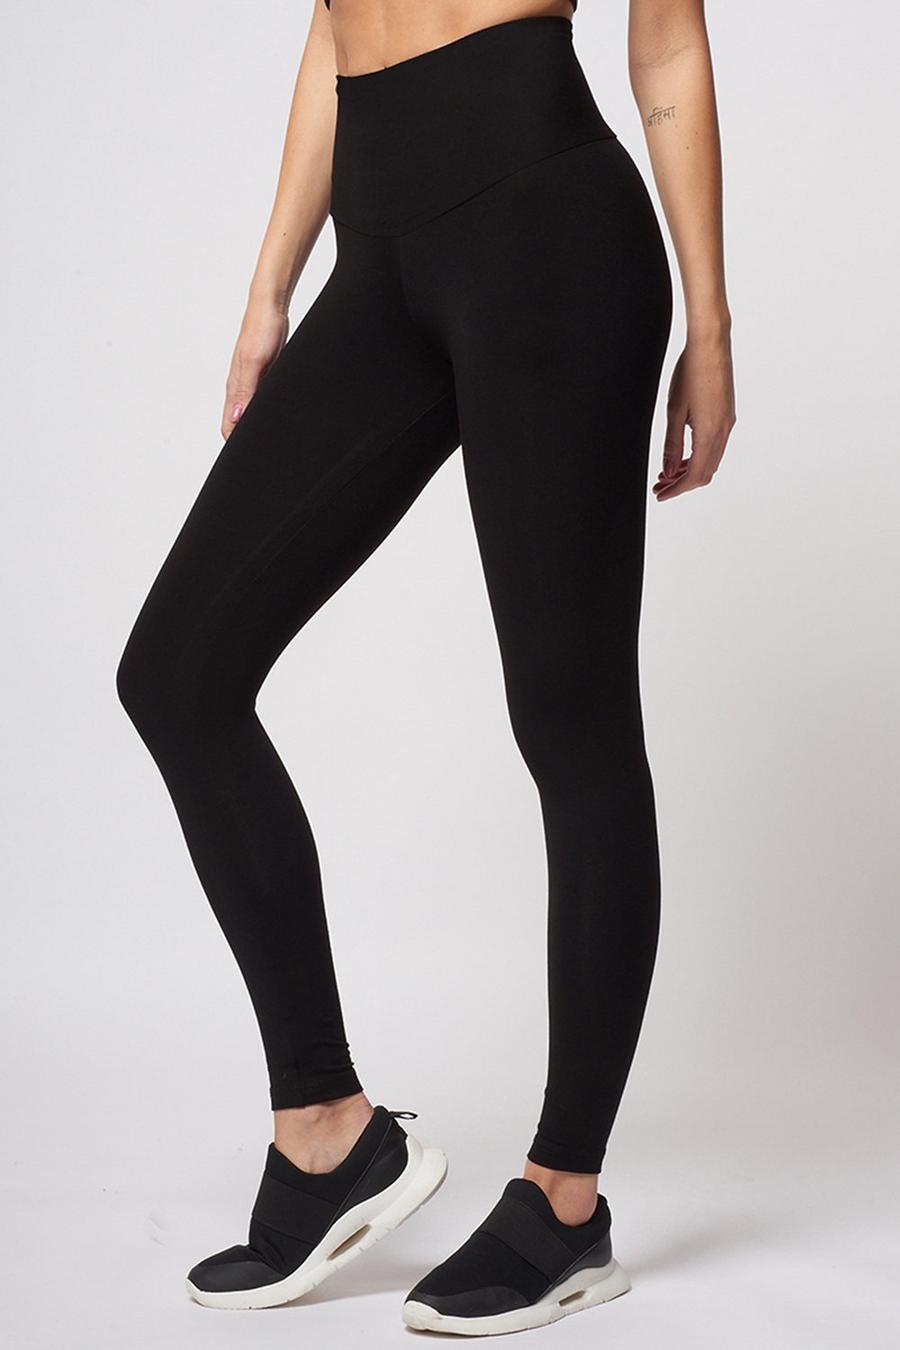 Black Tummy Control Extra Strong Compression Full Length Leggings